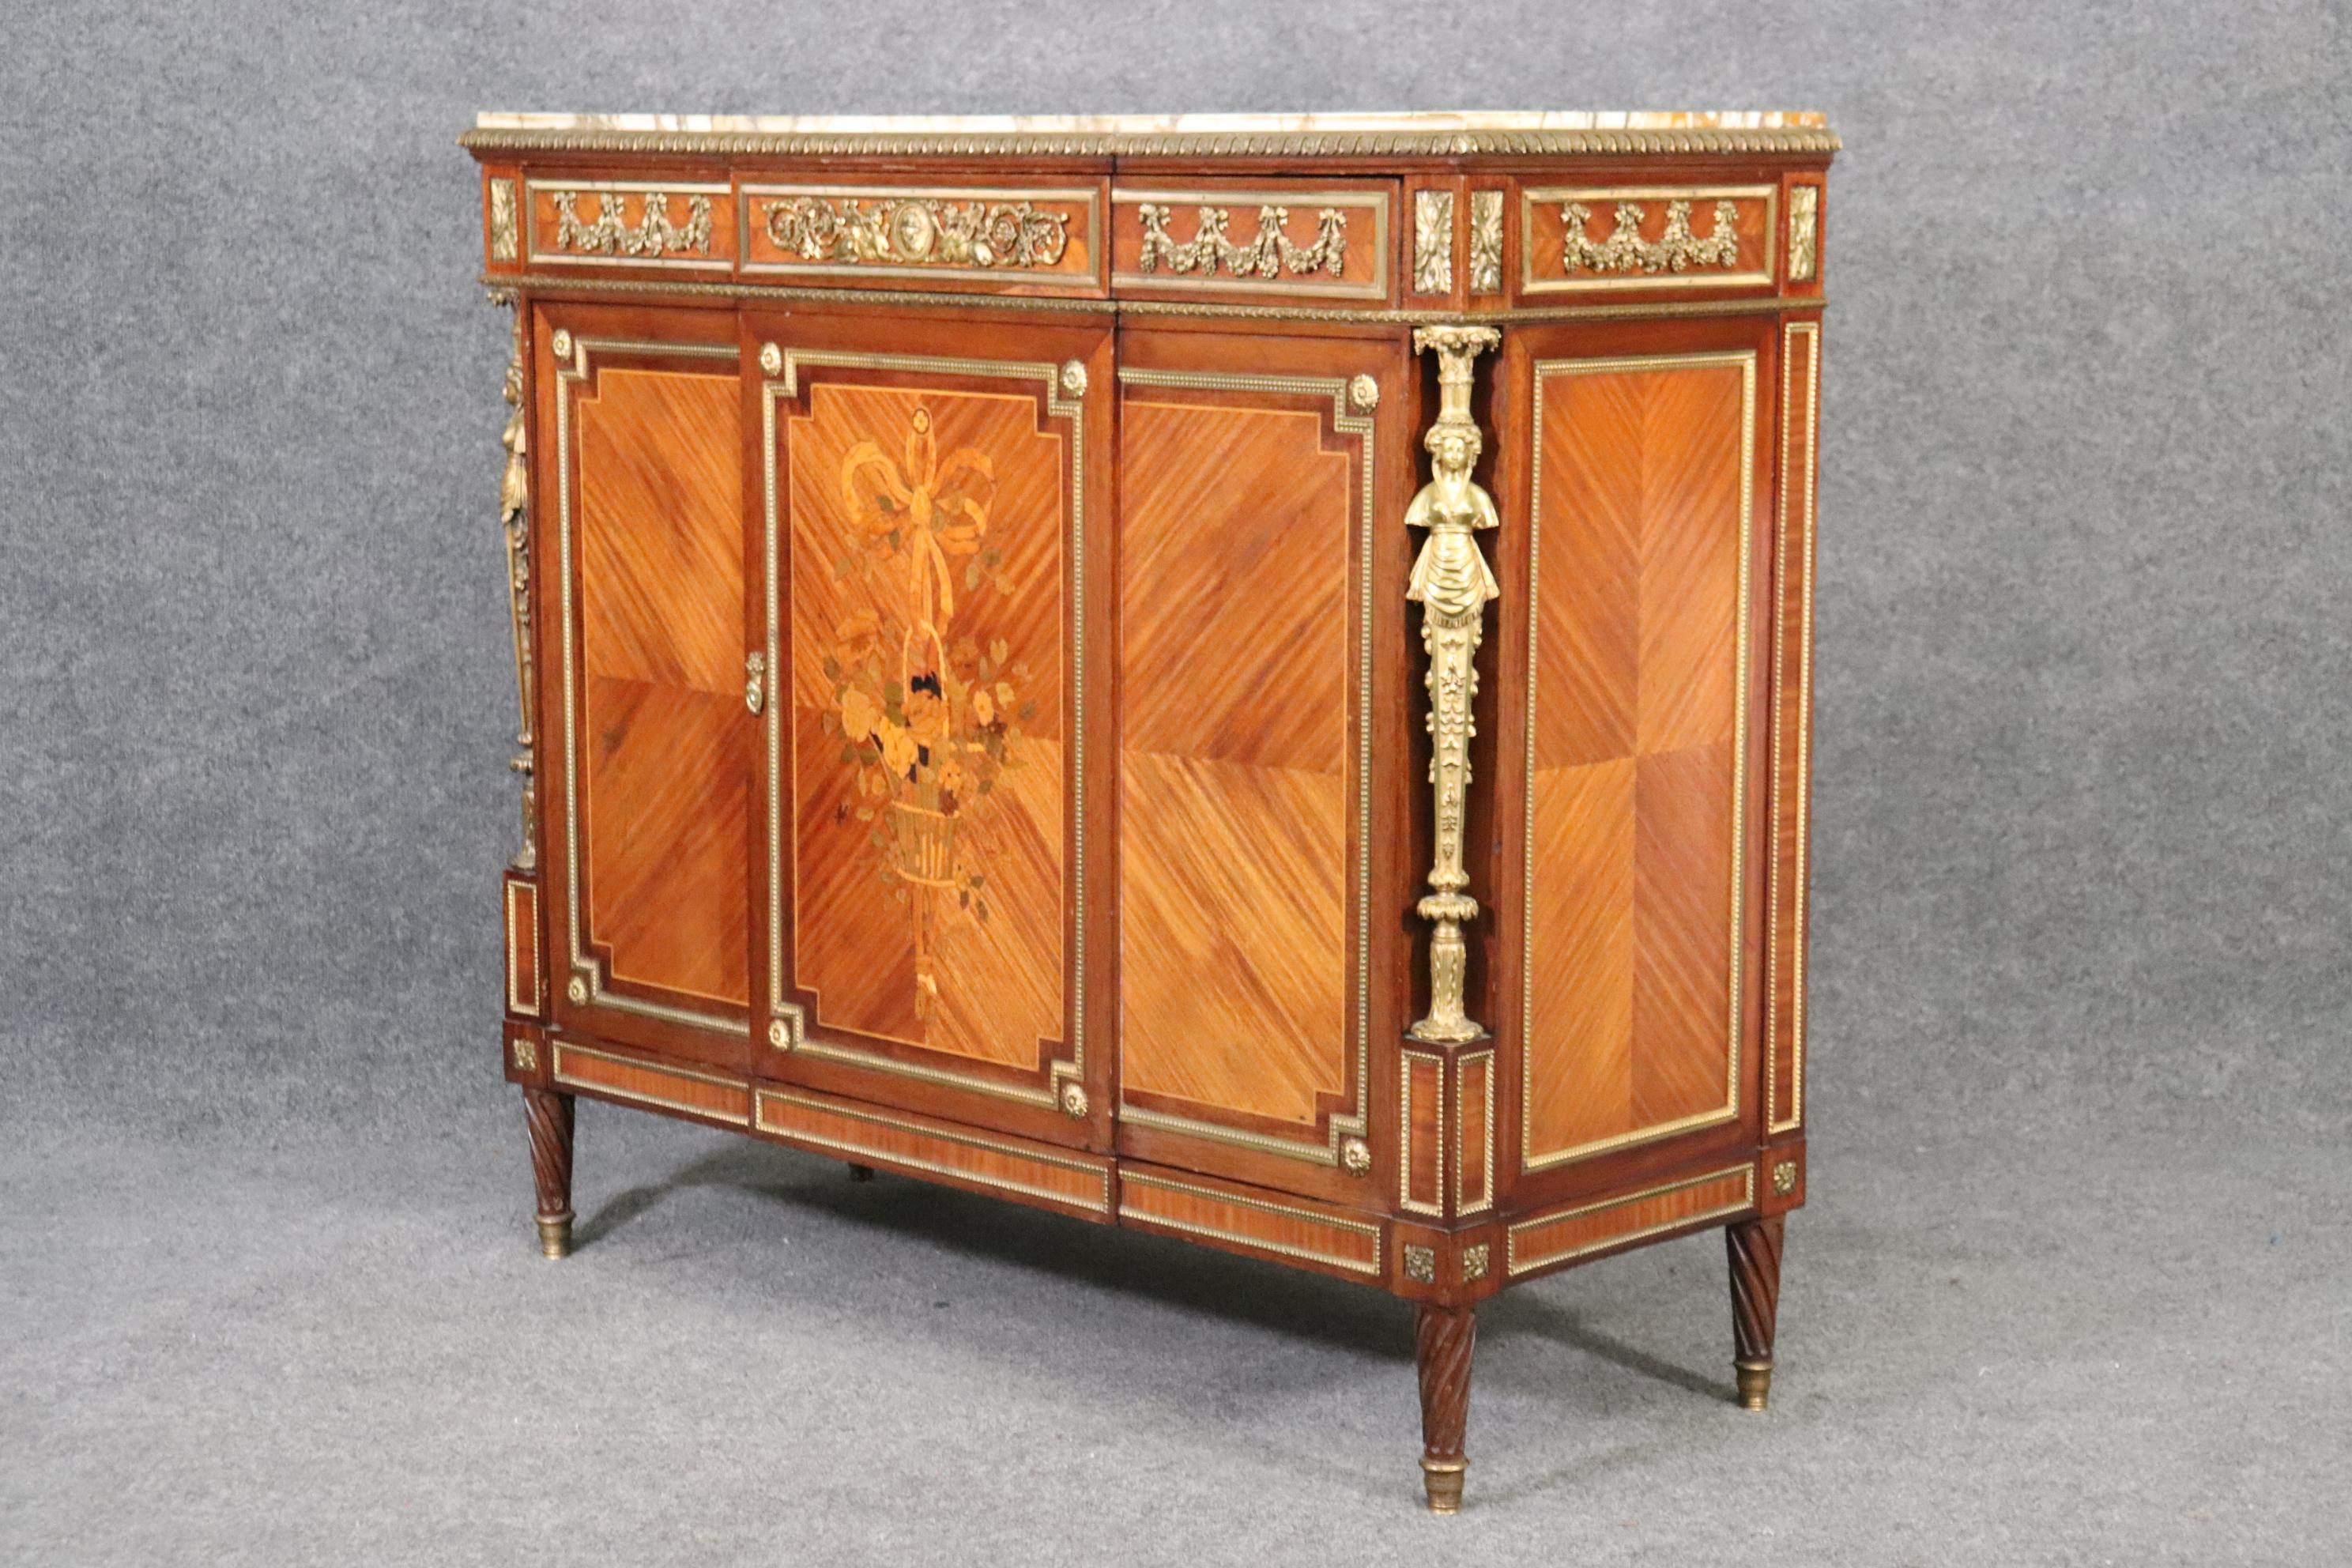 Superb Dor'e Bronze Mounted Figural Sideboard Attributed to Francois Linke In Good Condition For Sale In Swedesboro, NJ